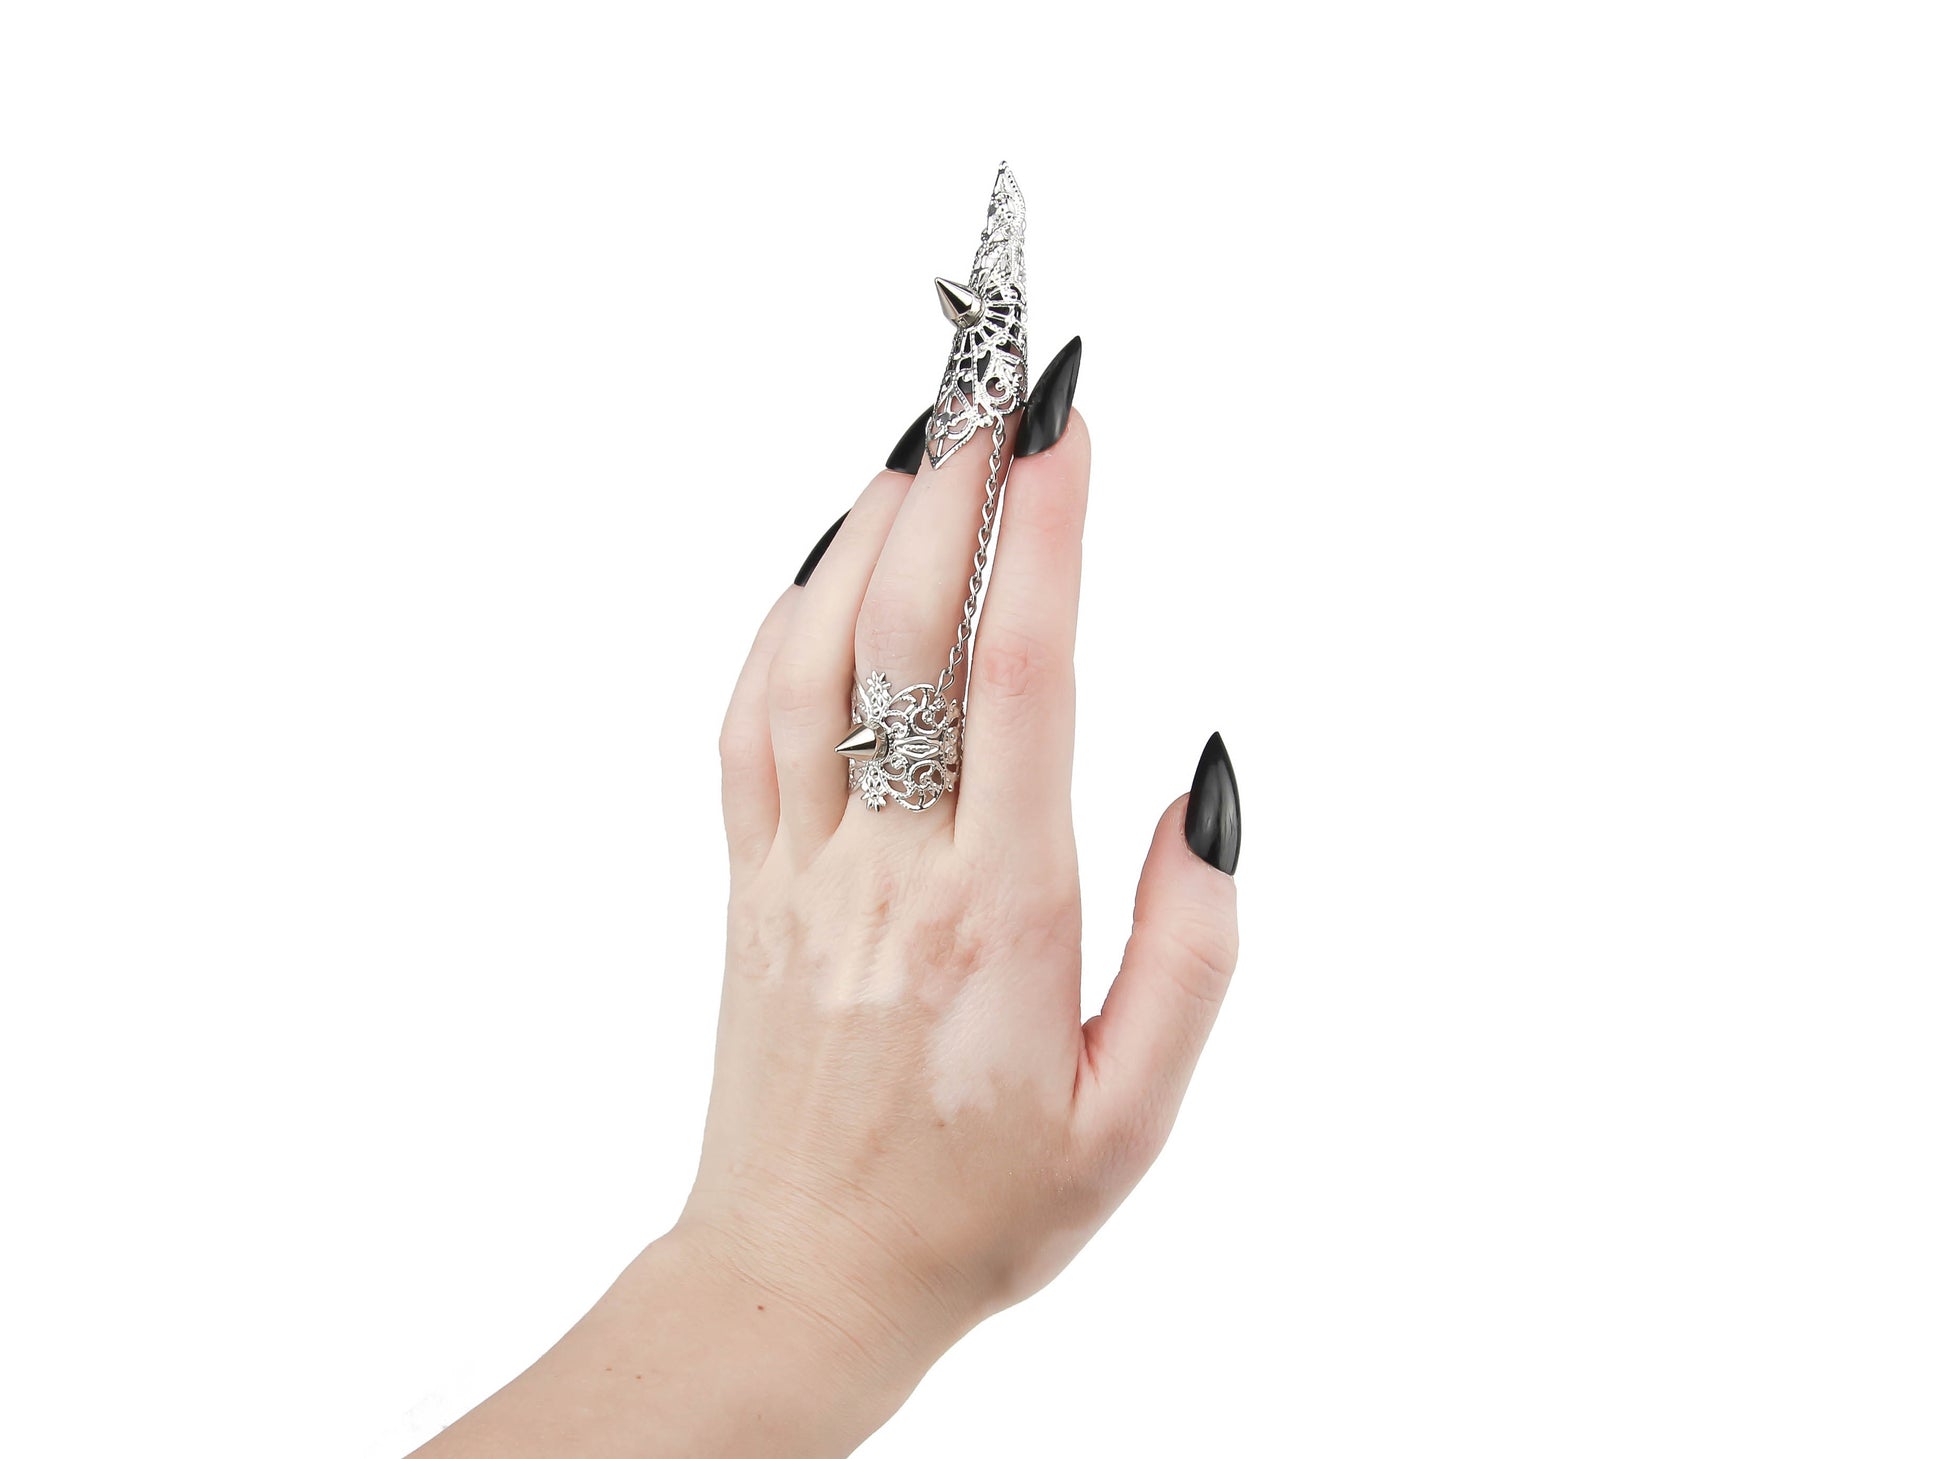 A hand is adorned with a striking Myril Jewels silver claw ring, featuring delicate filigree and bold studs. This studded ring embody the essence of neo-gothic luxury, perfect for anyone looking to add a touch of dark, avant-garde elegance to their Halloween or everyday gothic-chic style.